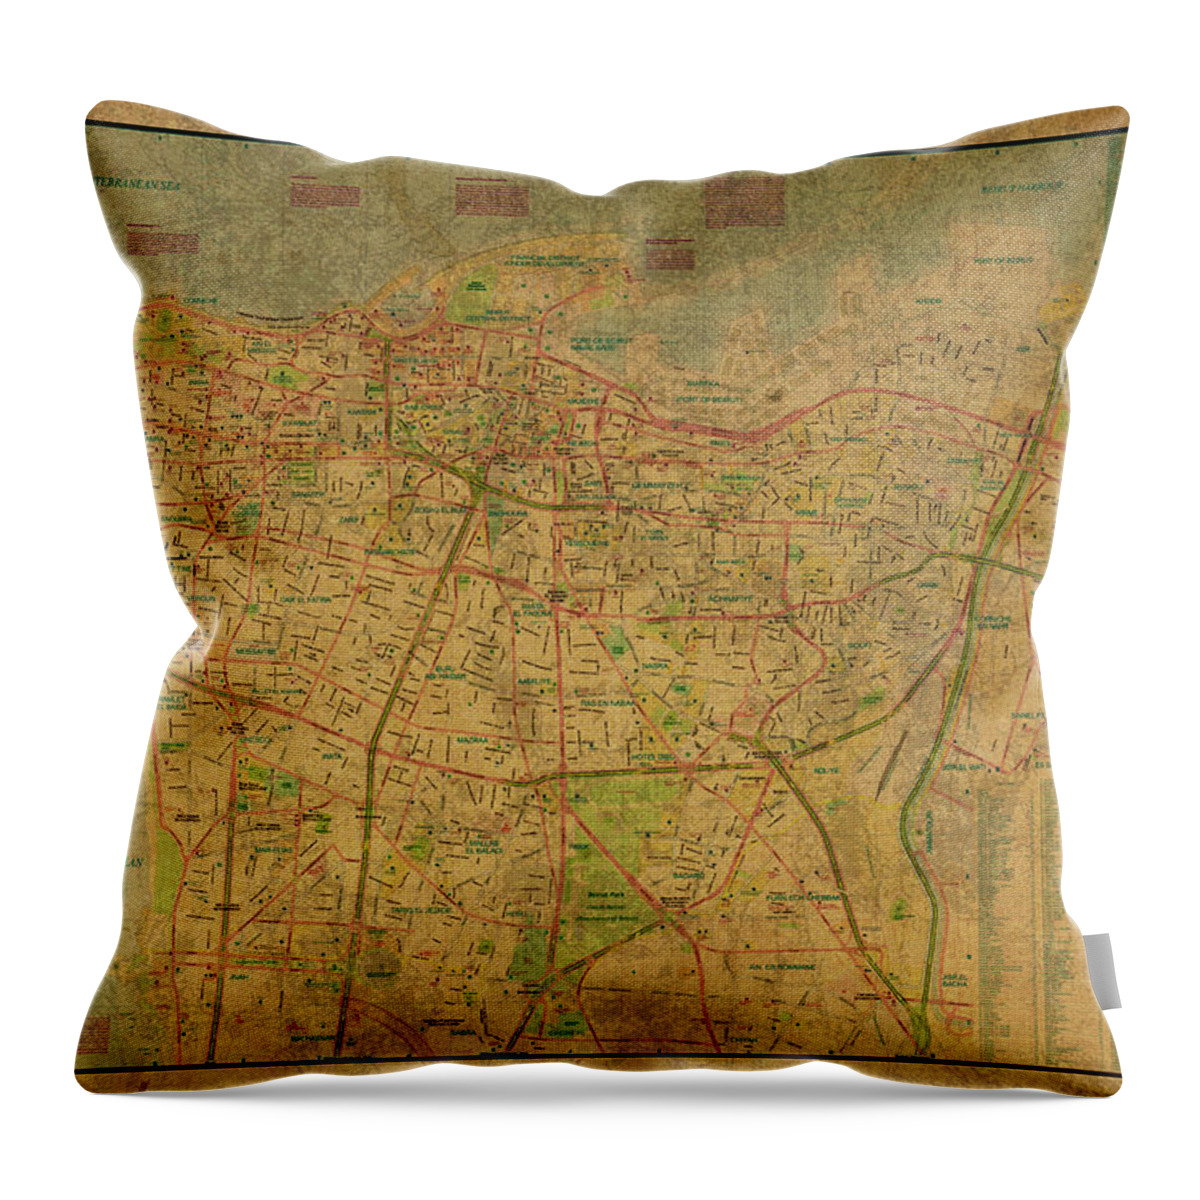 Vintage Throw Pillow featuring the mixed media Vintage Map of Beirut Lebanon by Design Turnpike